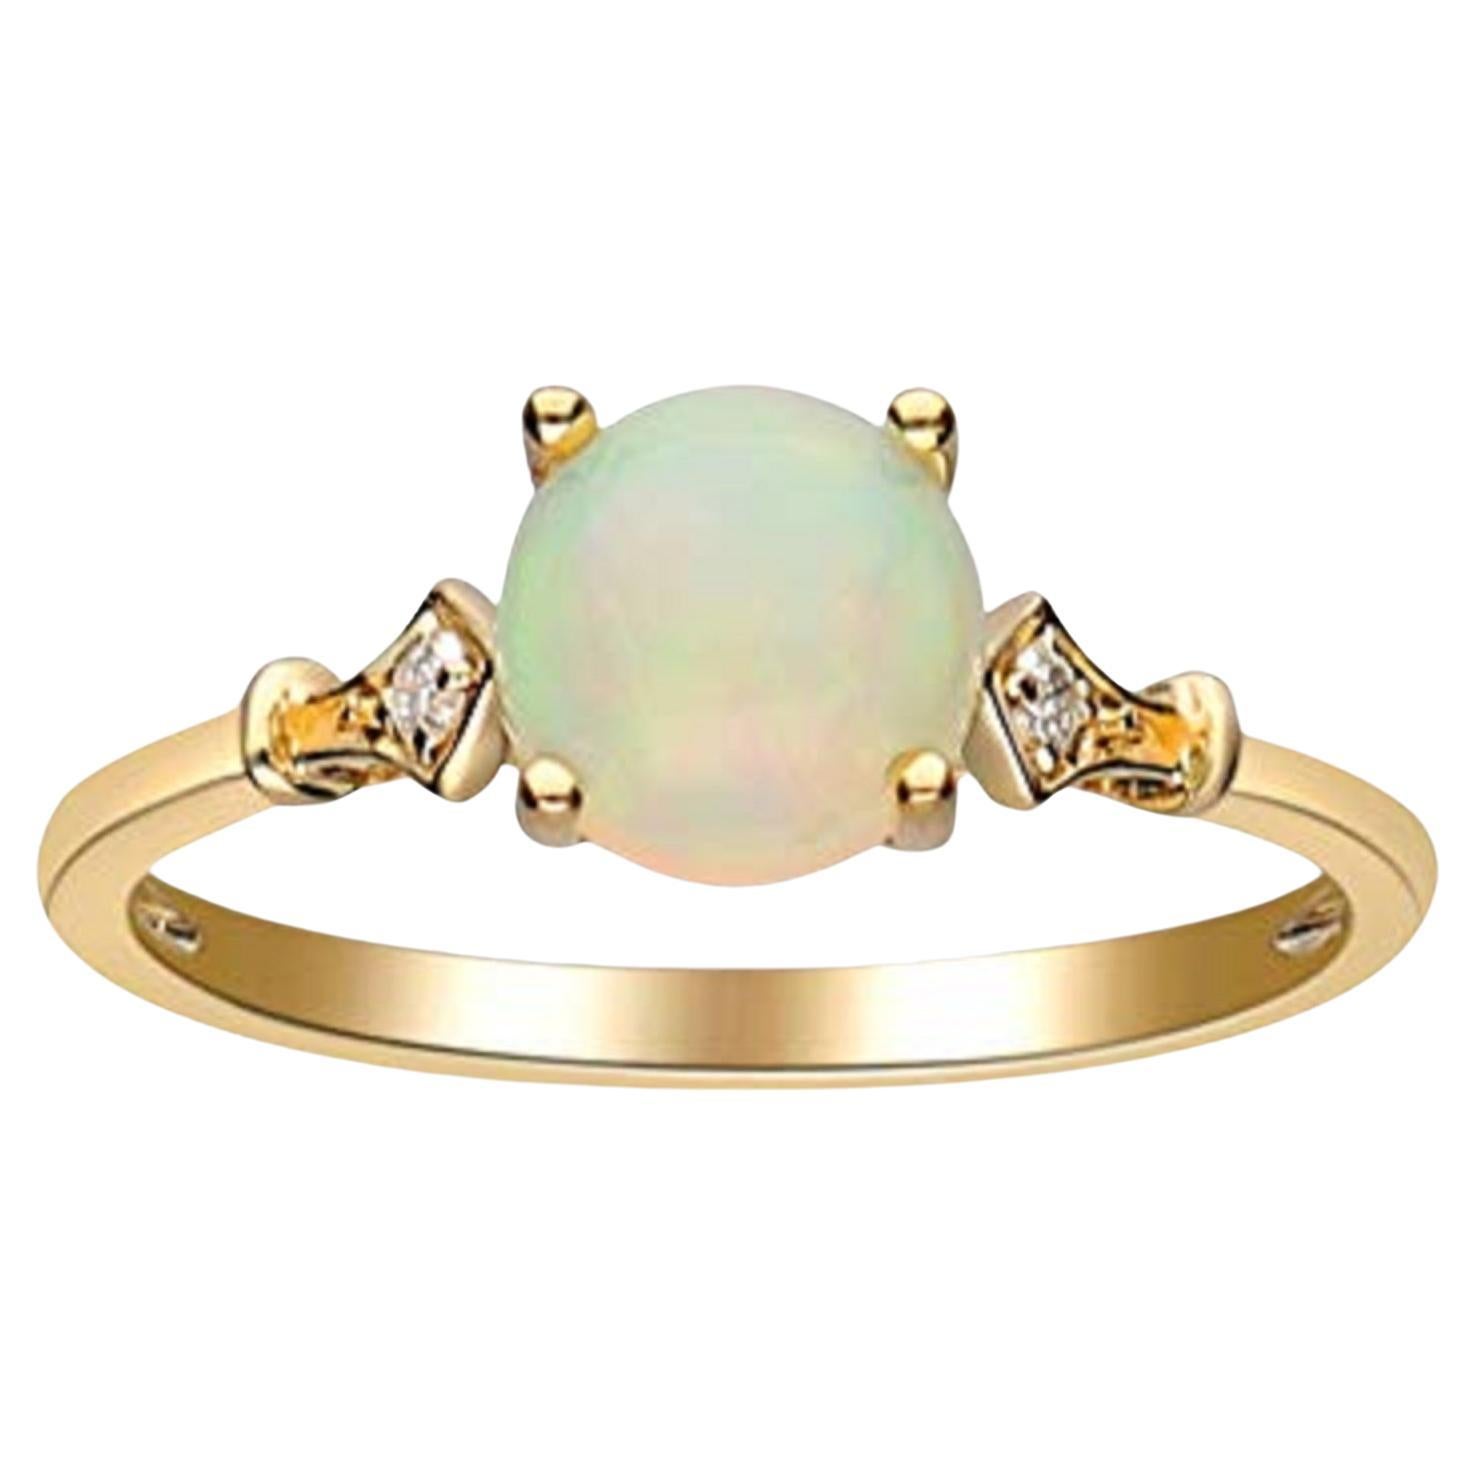 Gin & Grace 14K Yellow Gold Ethiopian Opal Ring with Real Diamonds for women